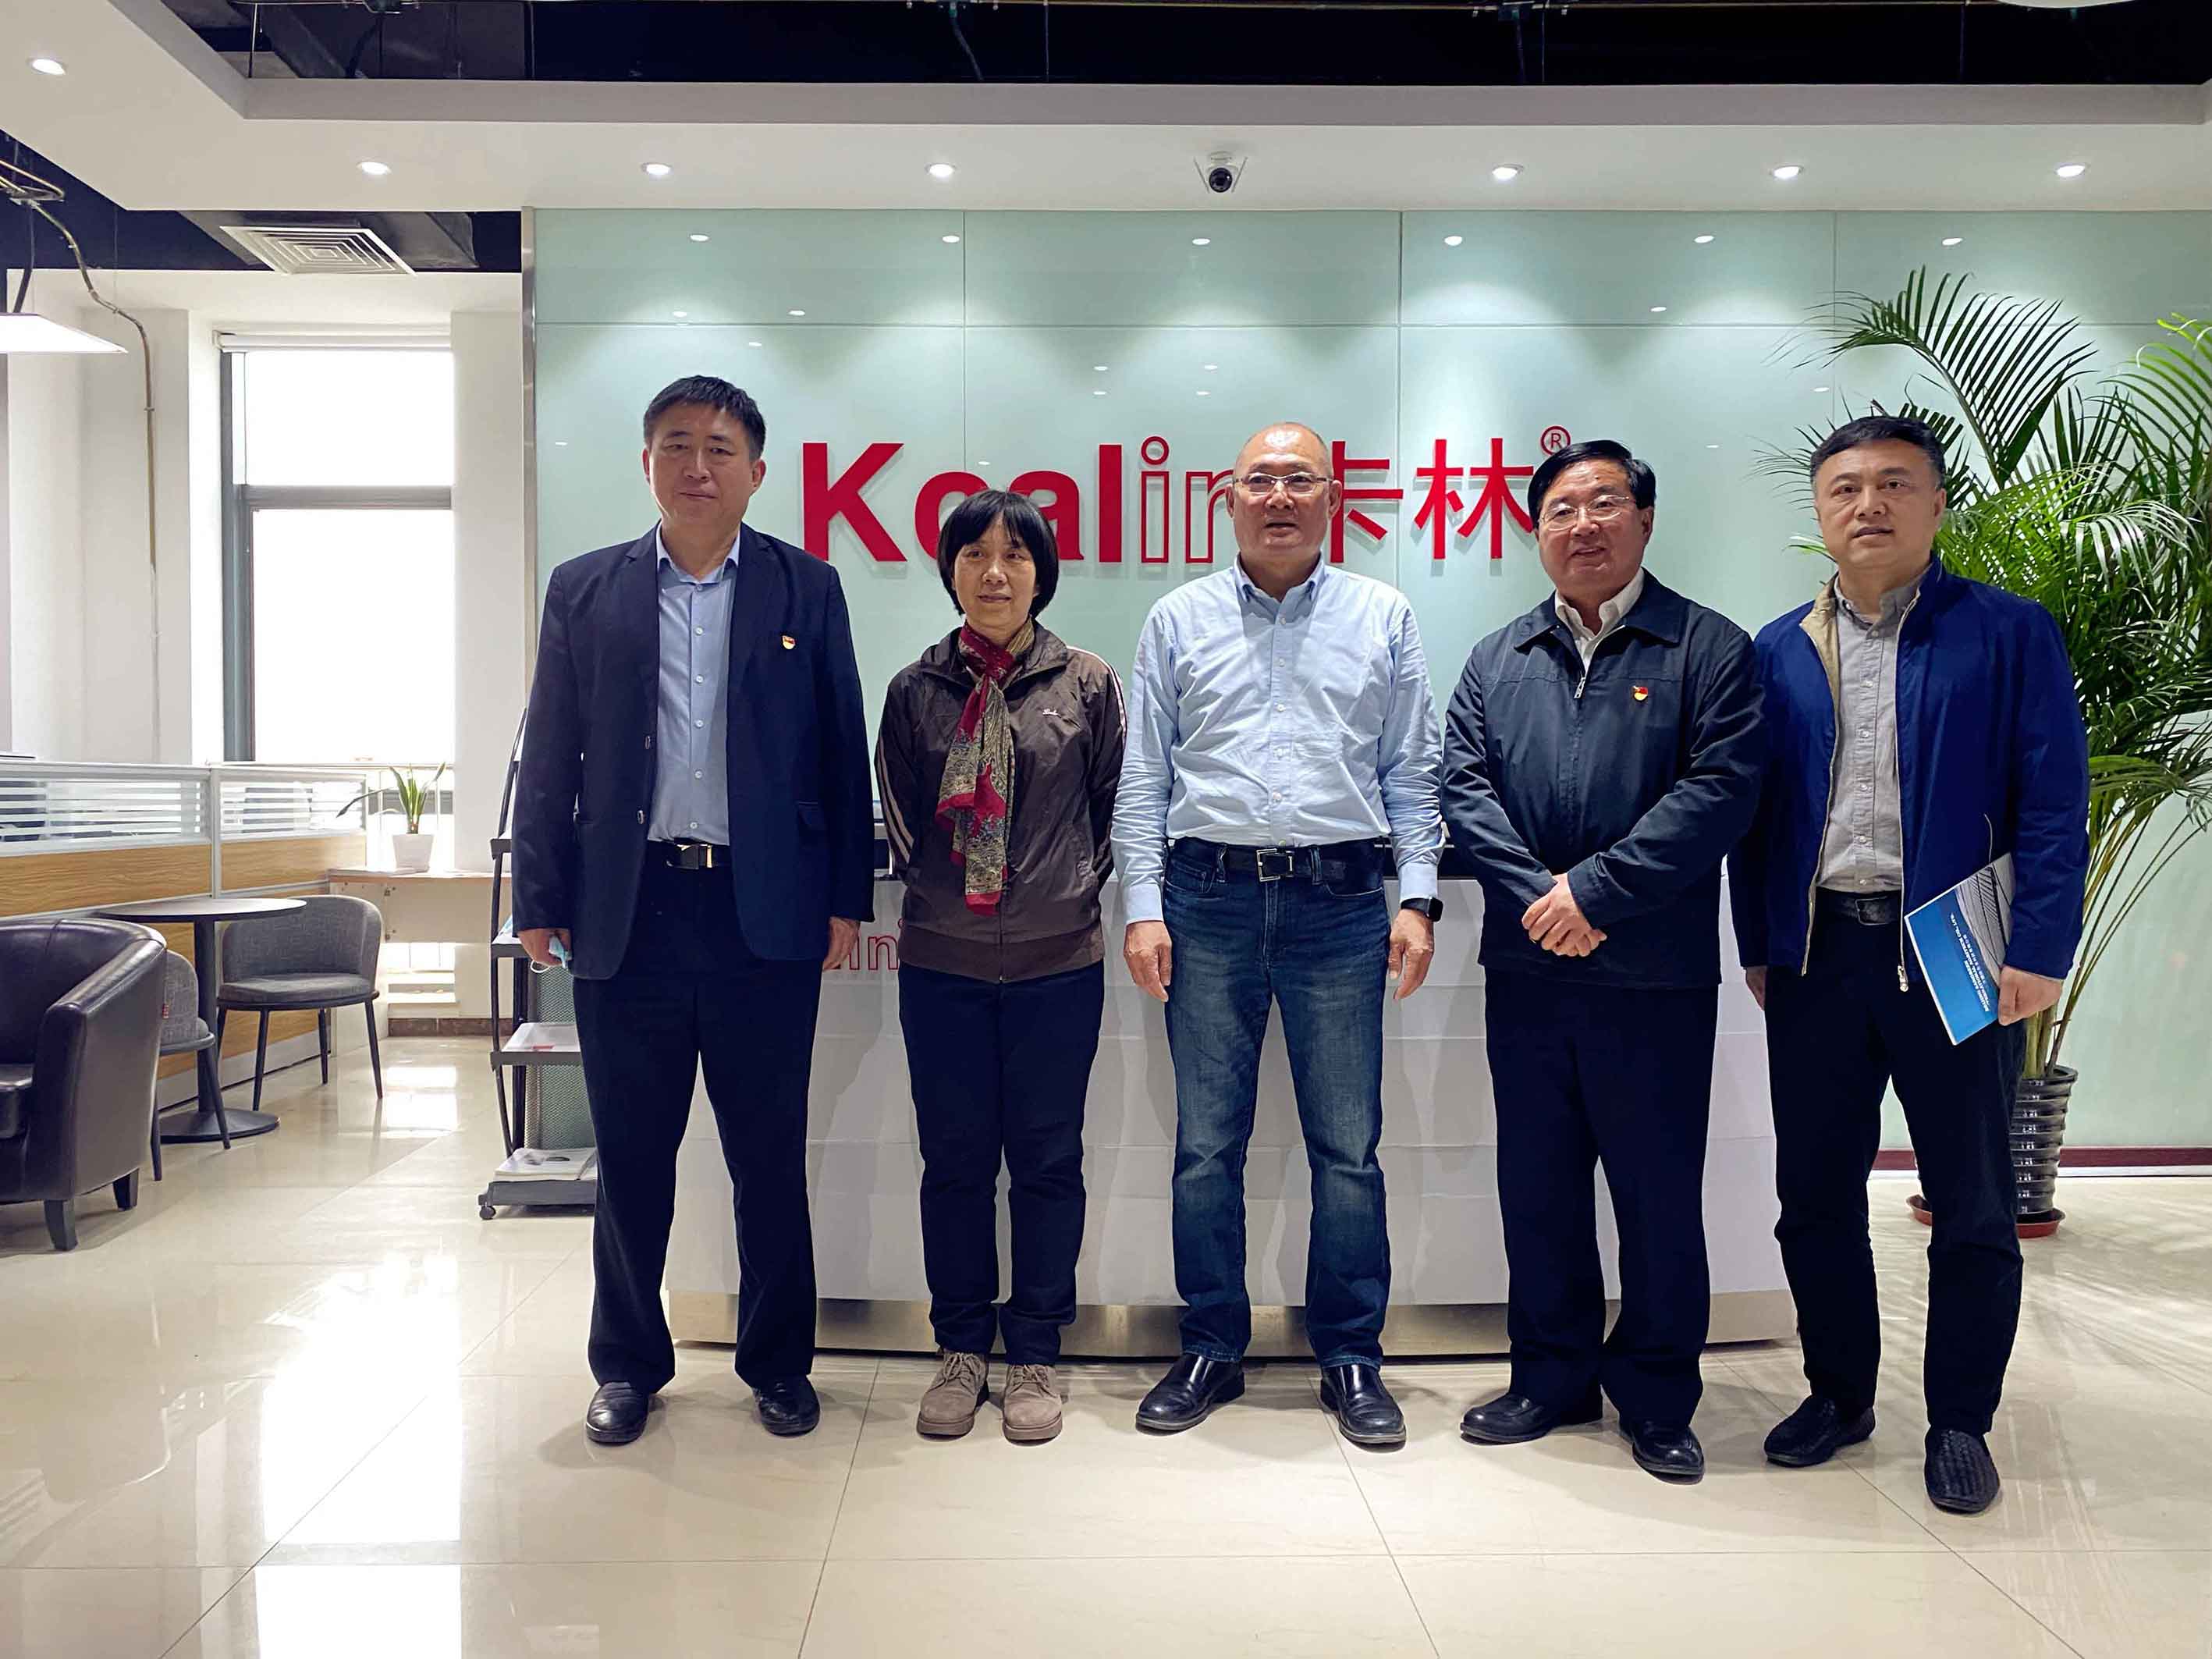 Leaders of Changping District Association of Science and Technology visited Kcalin for guidance